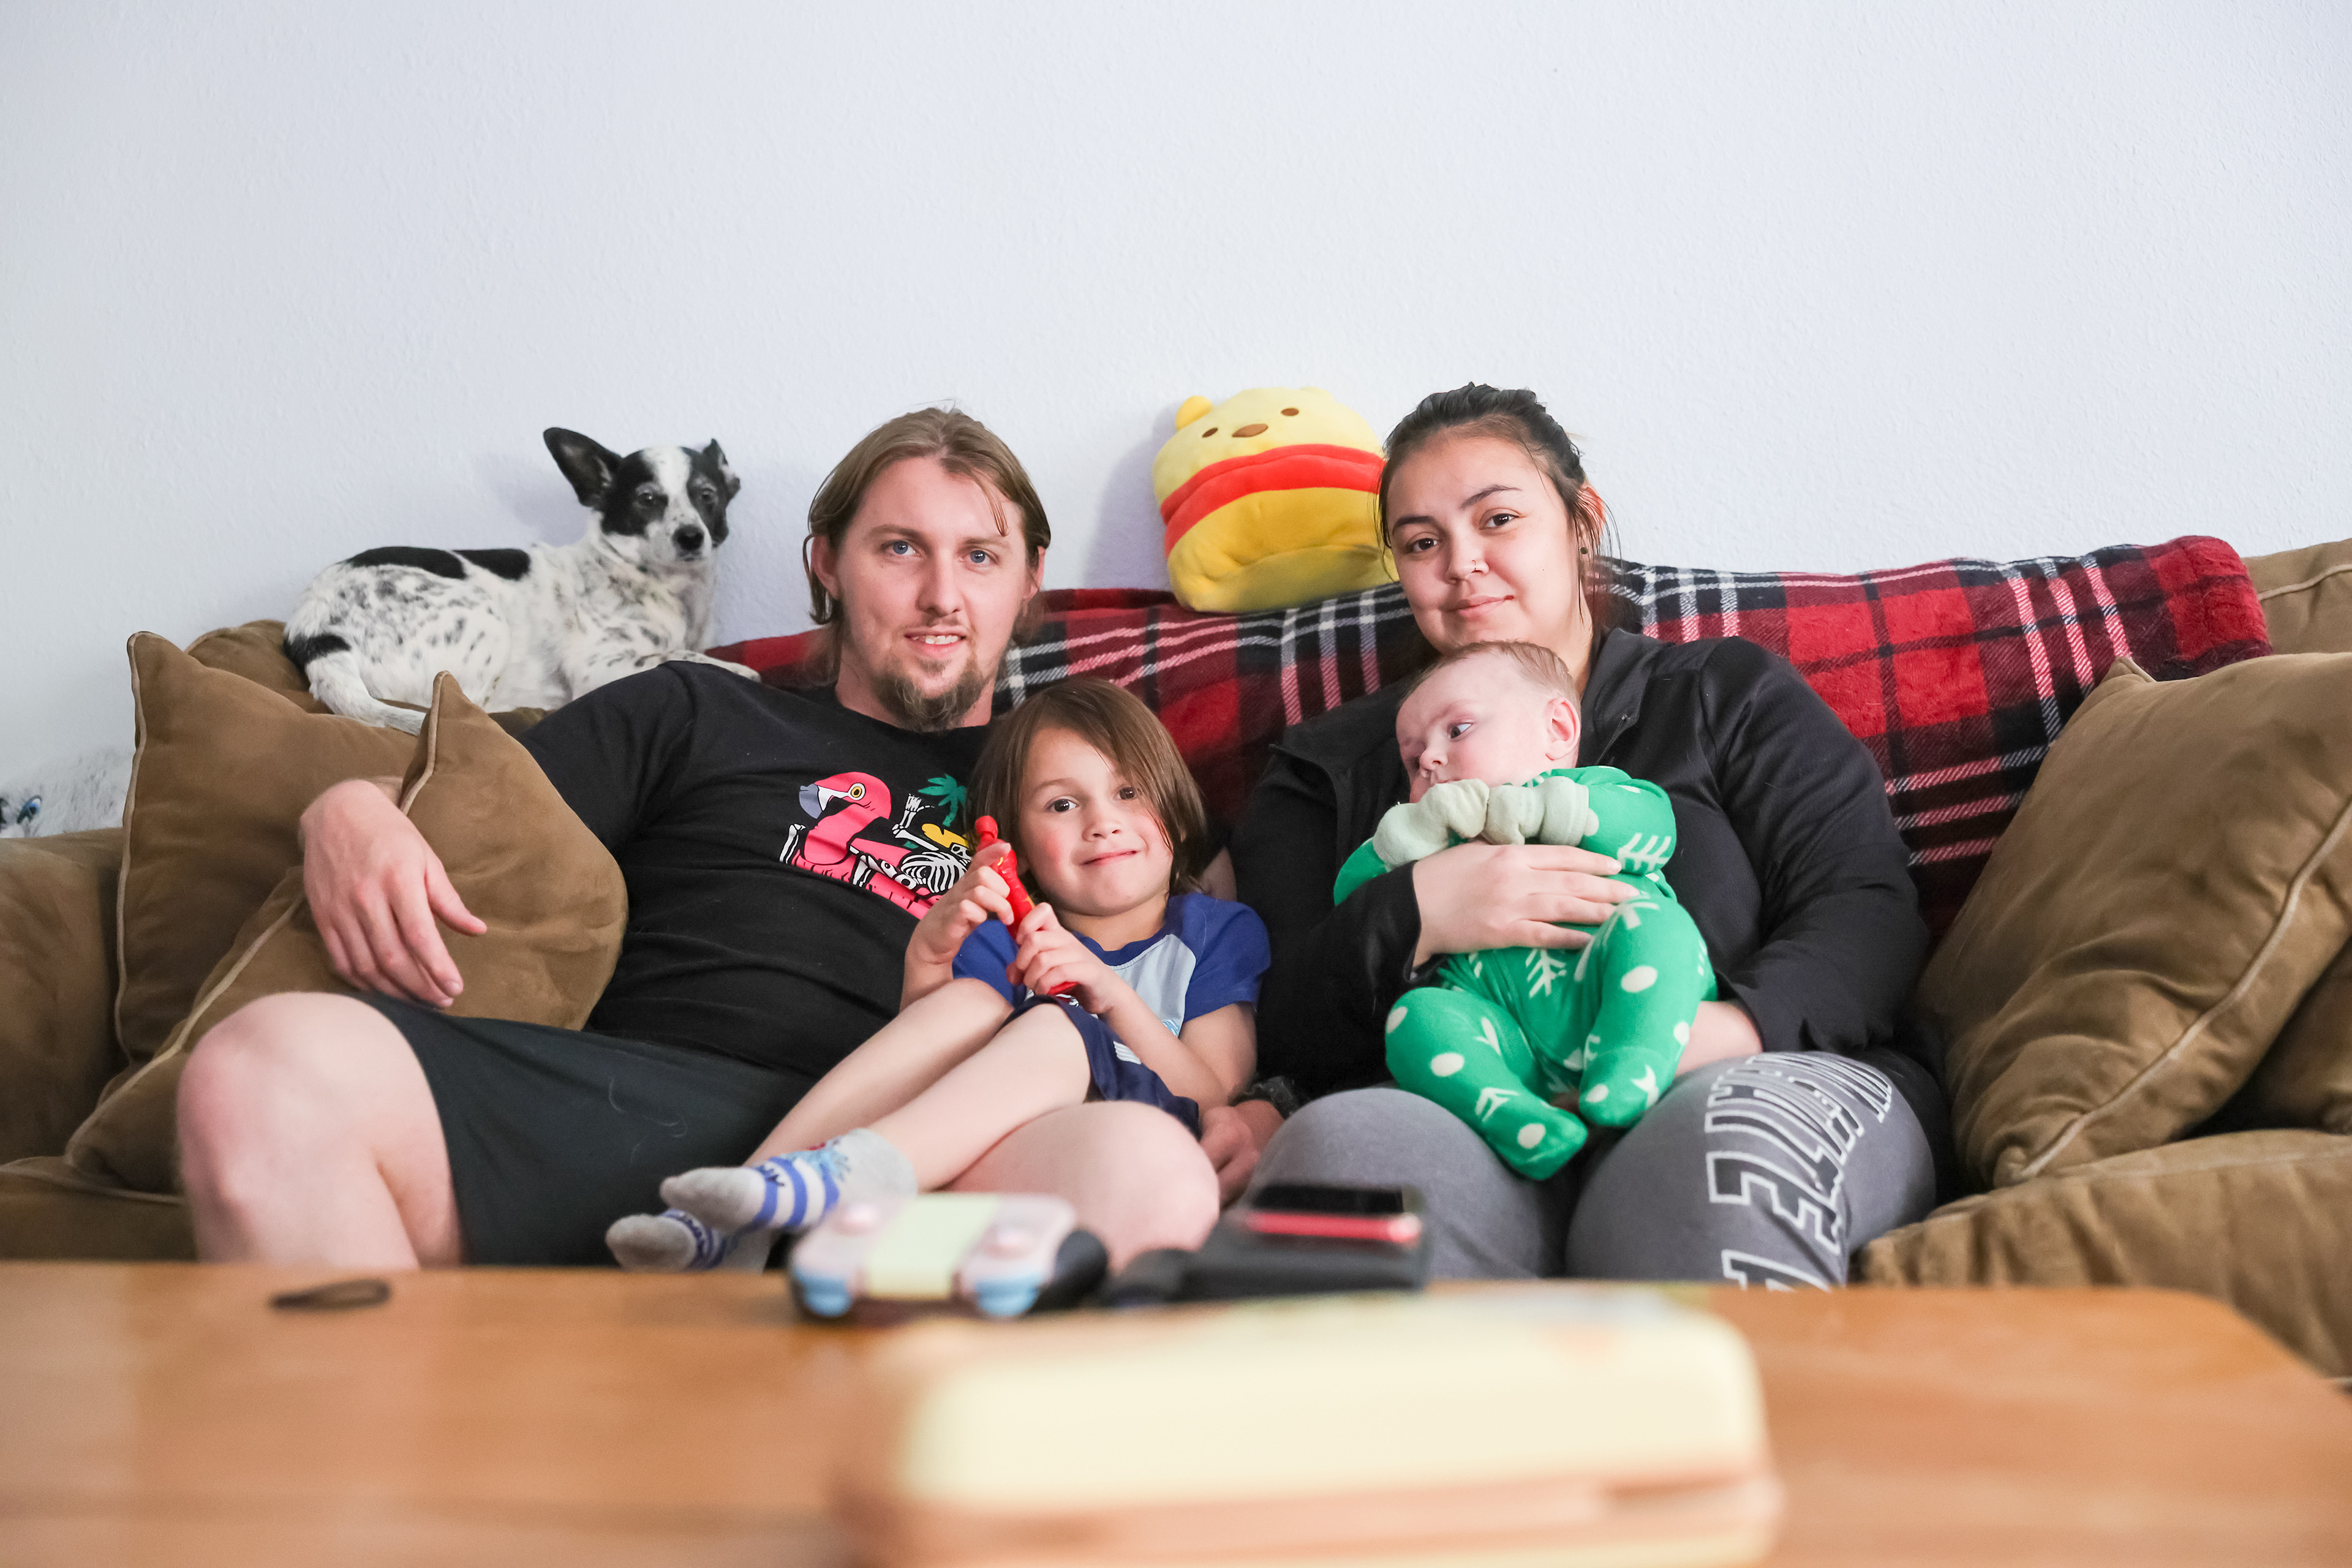 Jade Vandiver sits with her husband, Zane, and sons, Zachary (left) and Ezra (right), and their small dog. They are on a couch in their home.